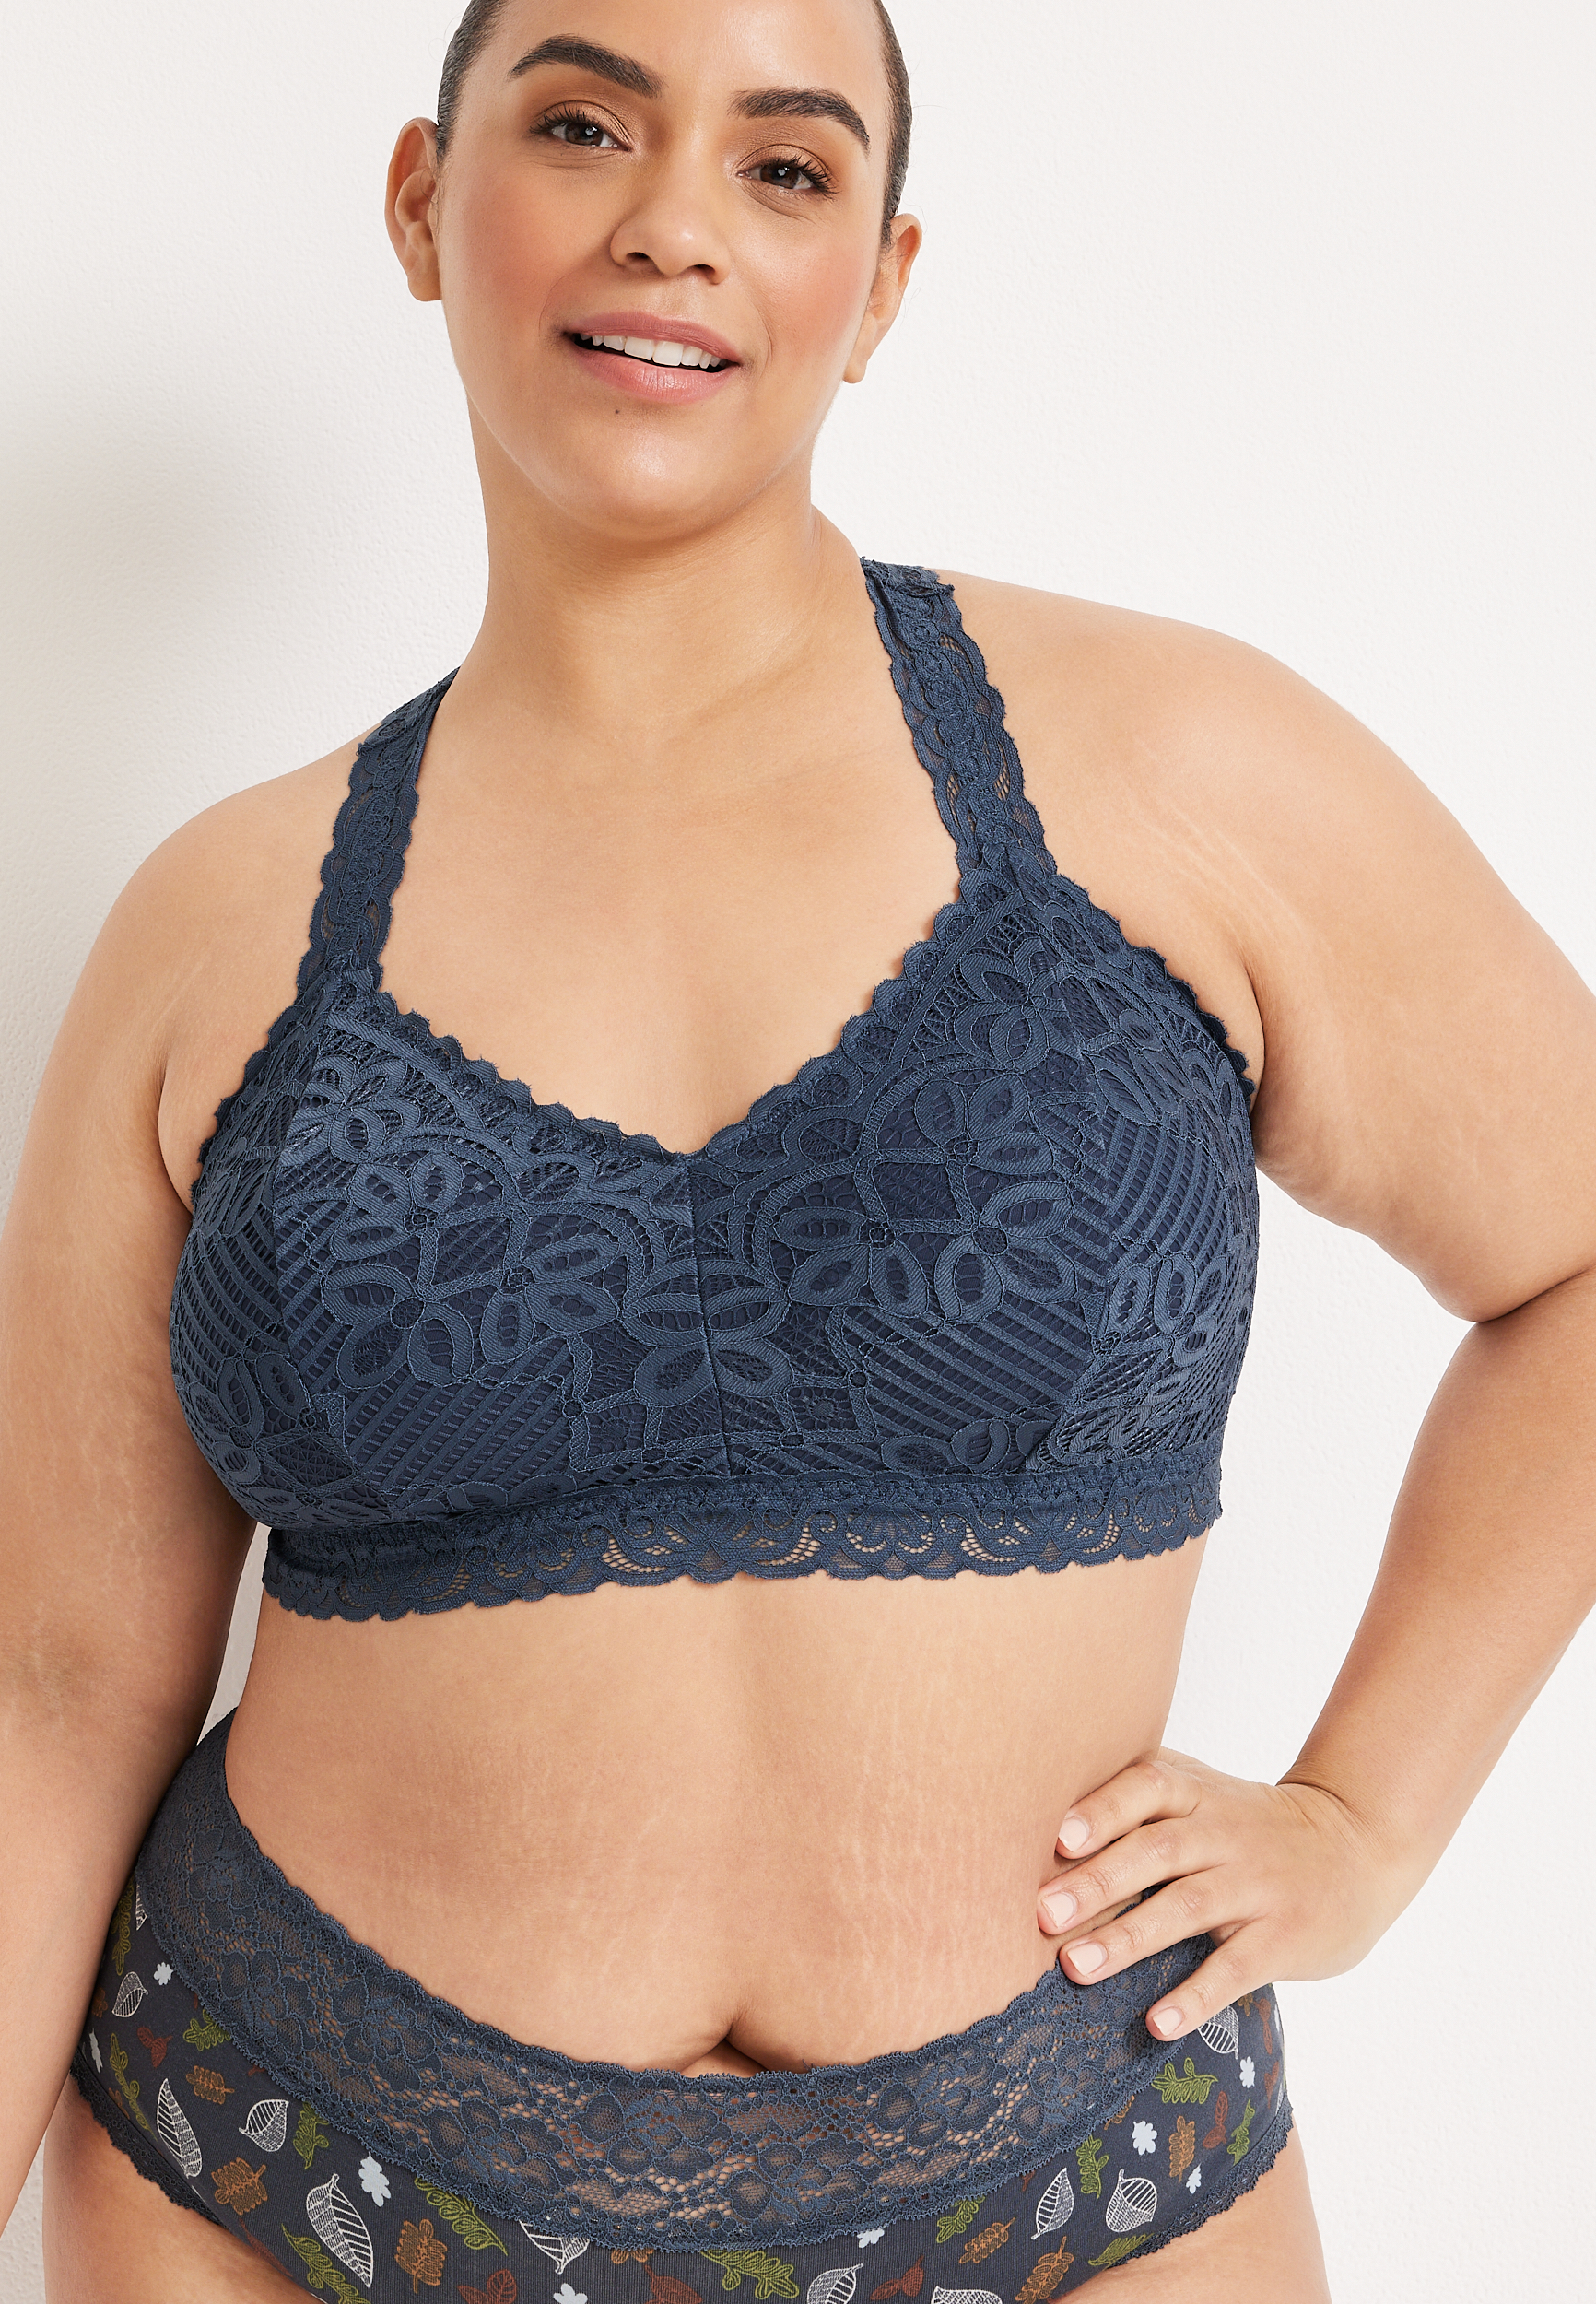 Shop maurices Women's Racerback Bras up to 65% Off